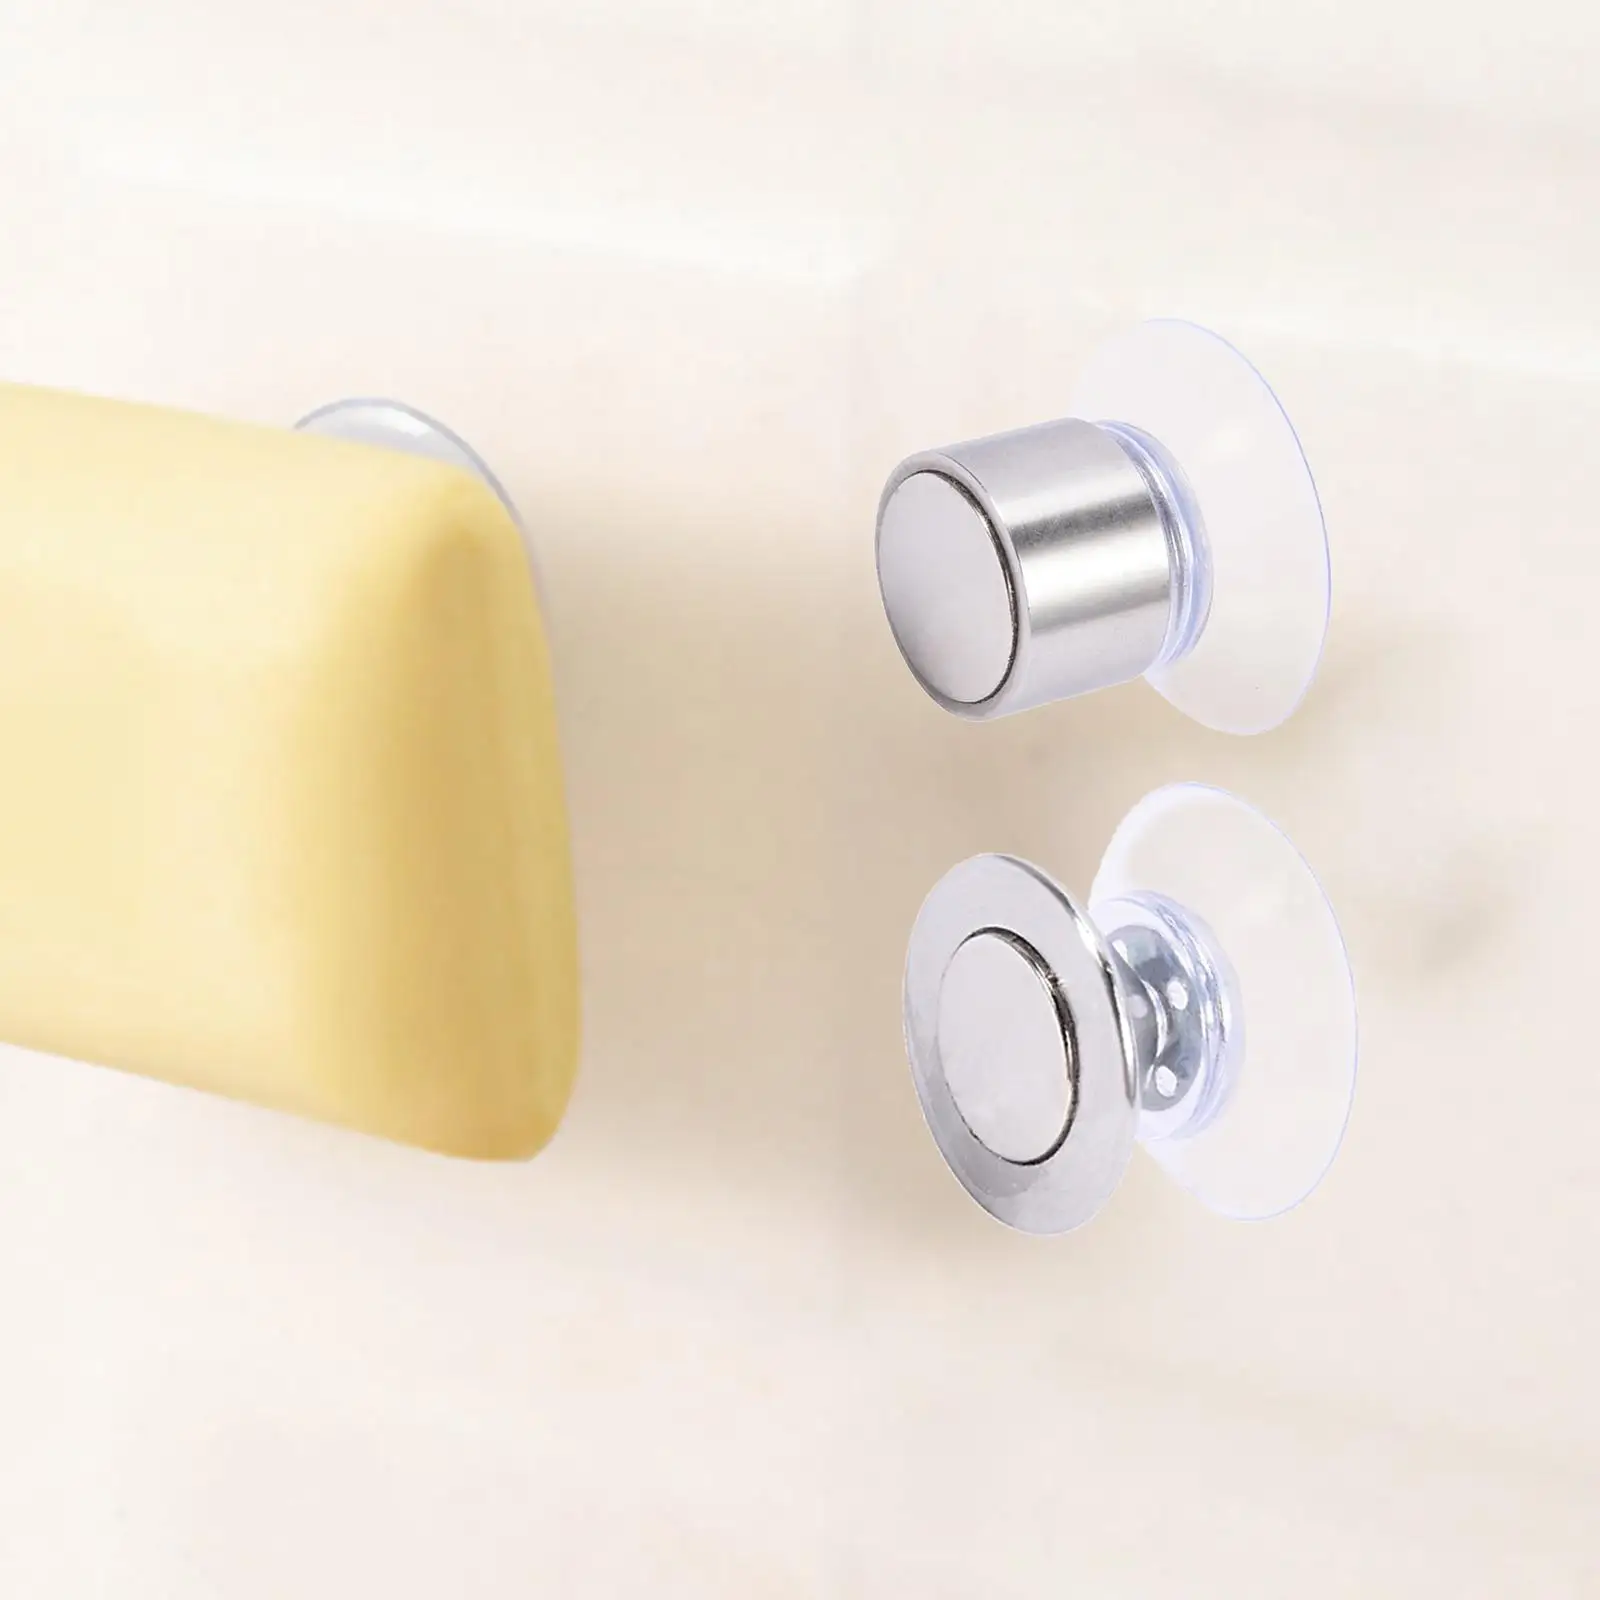 Soap , Wall Mounted, easy to clean Bracket for Kitchen Toilet Bathroom Gadgets